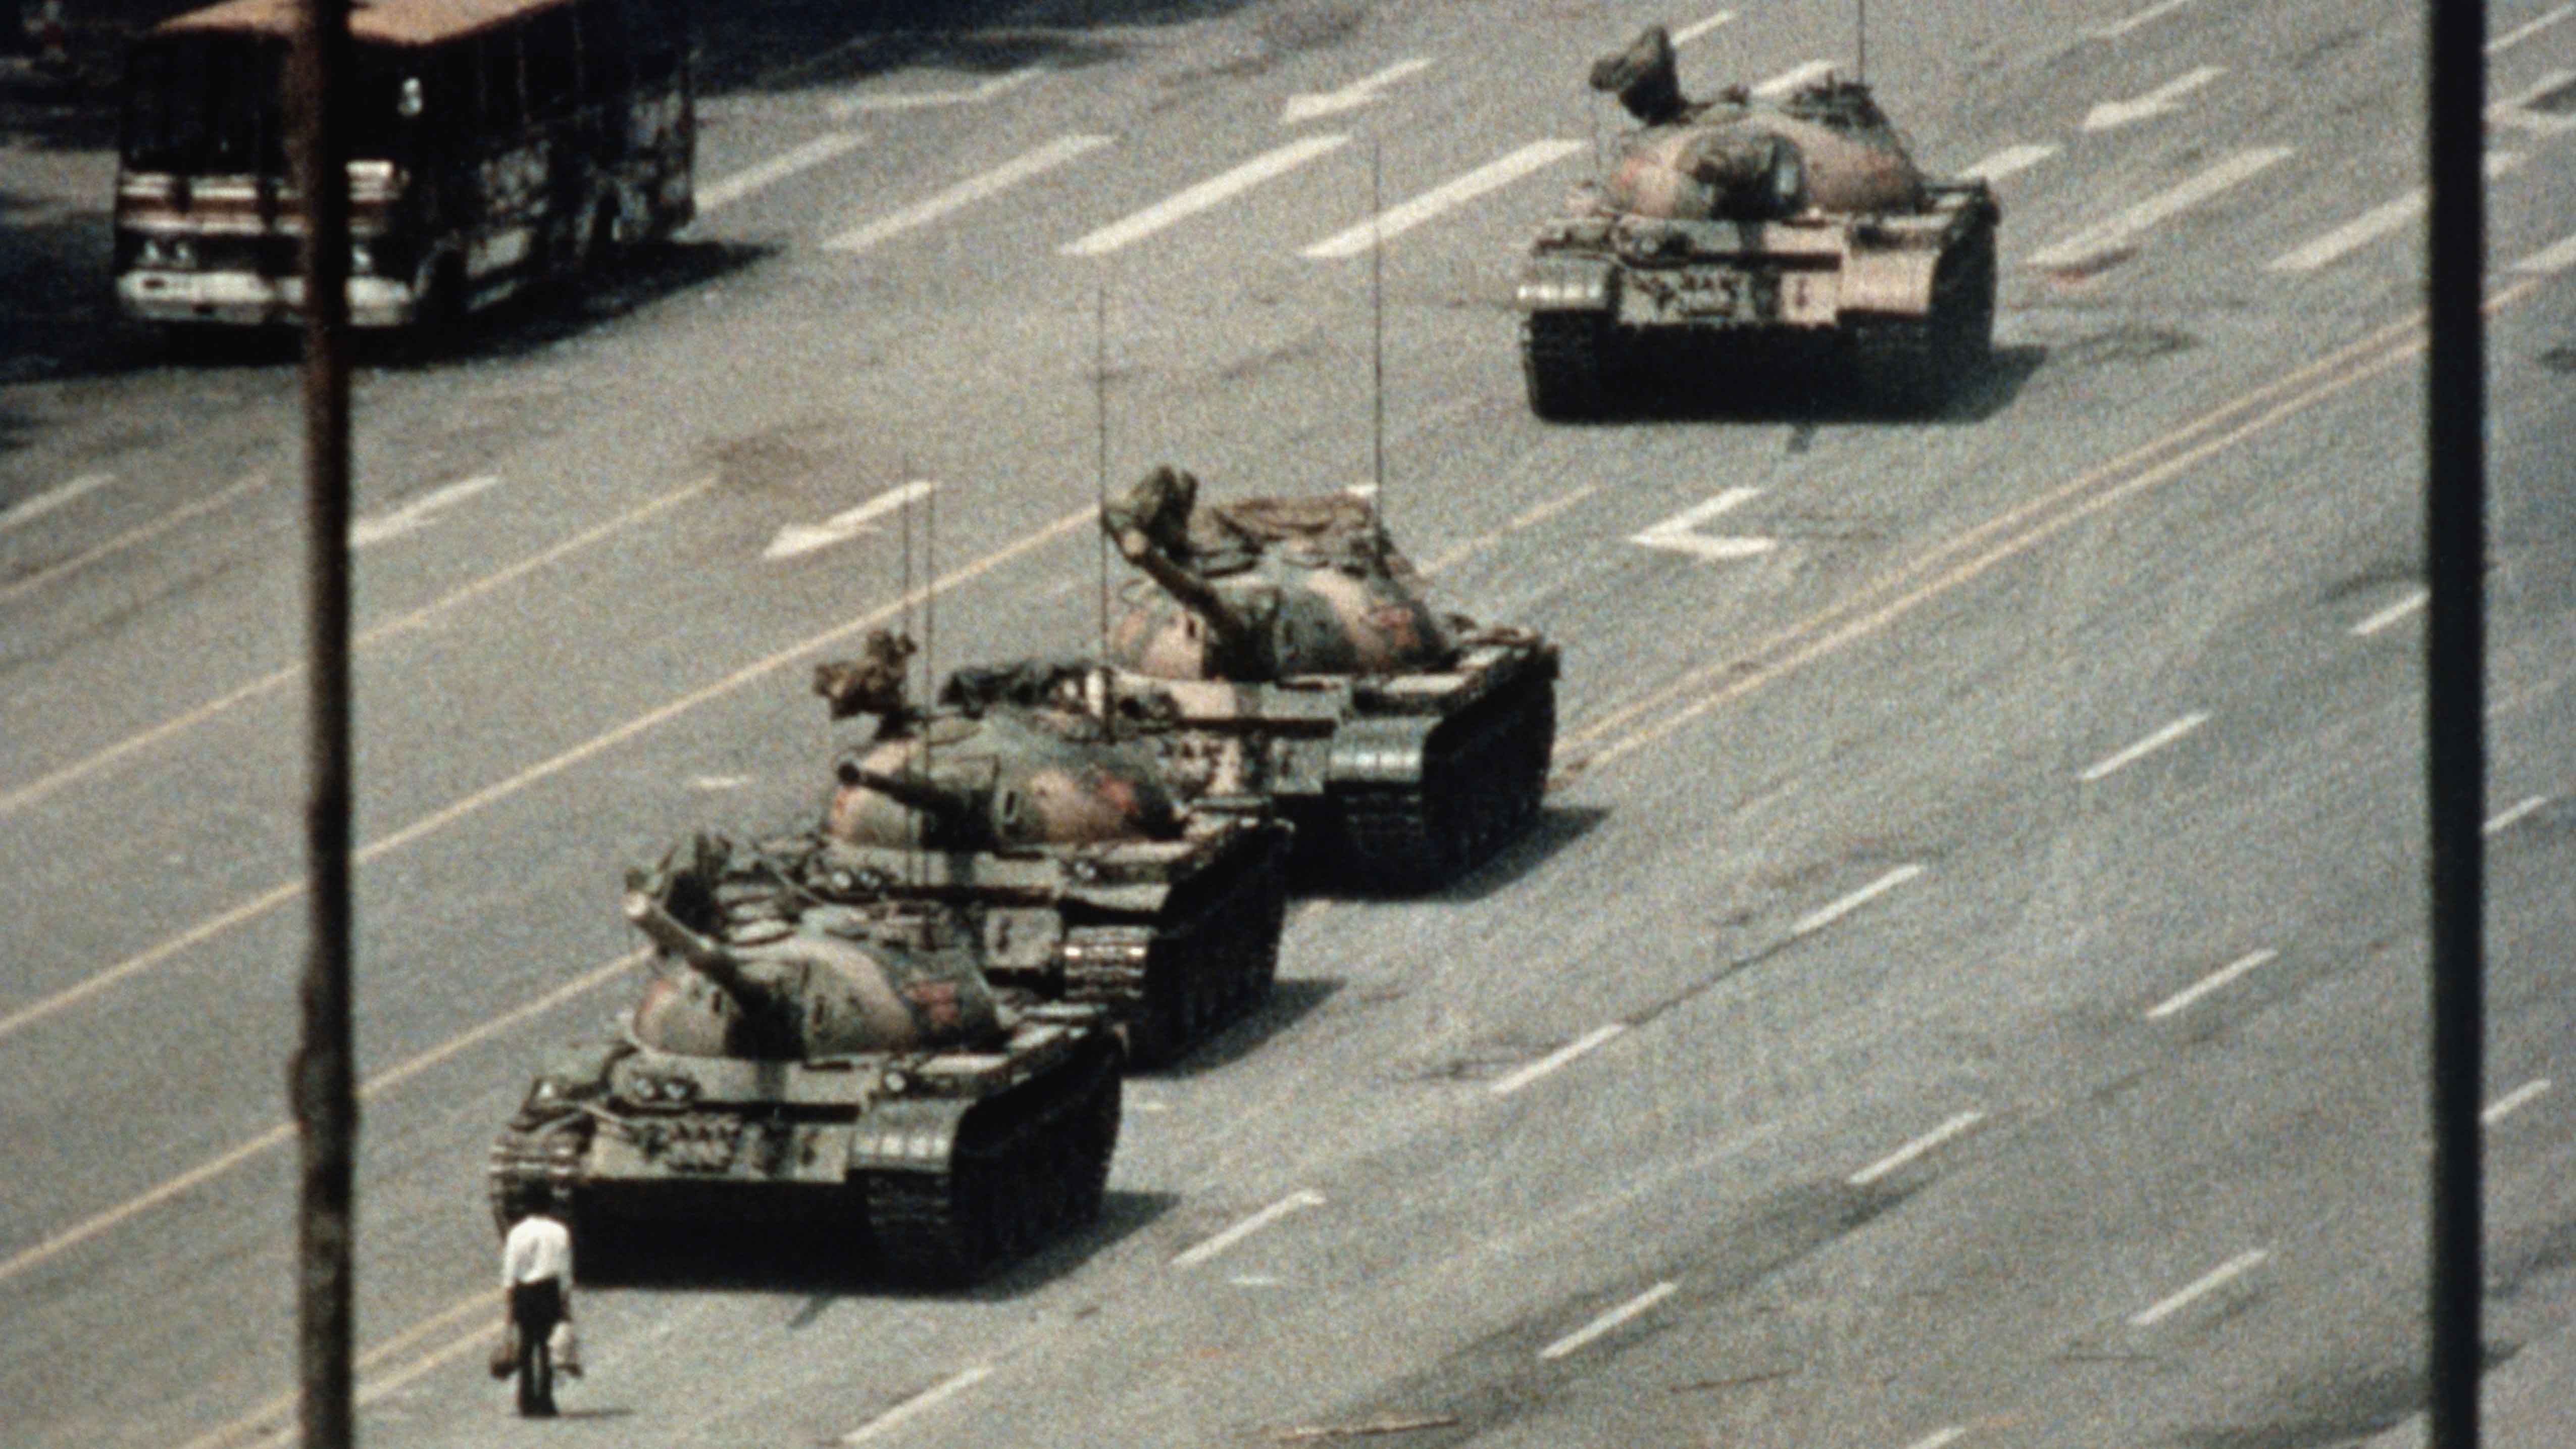 who-was-the-tank-man-of-tiananmen-squares-featured-photo.jpg